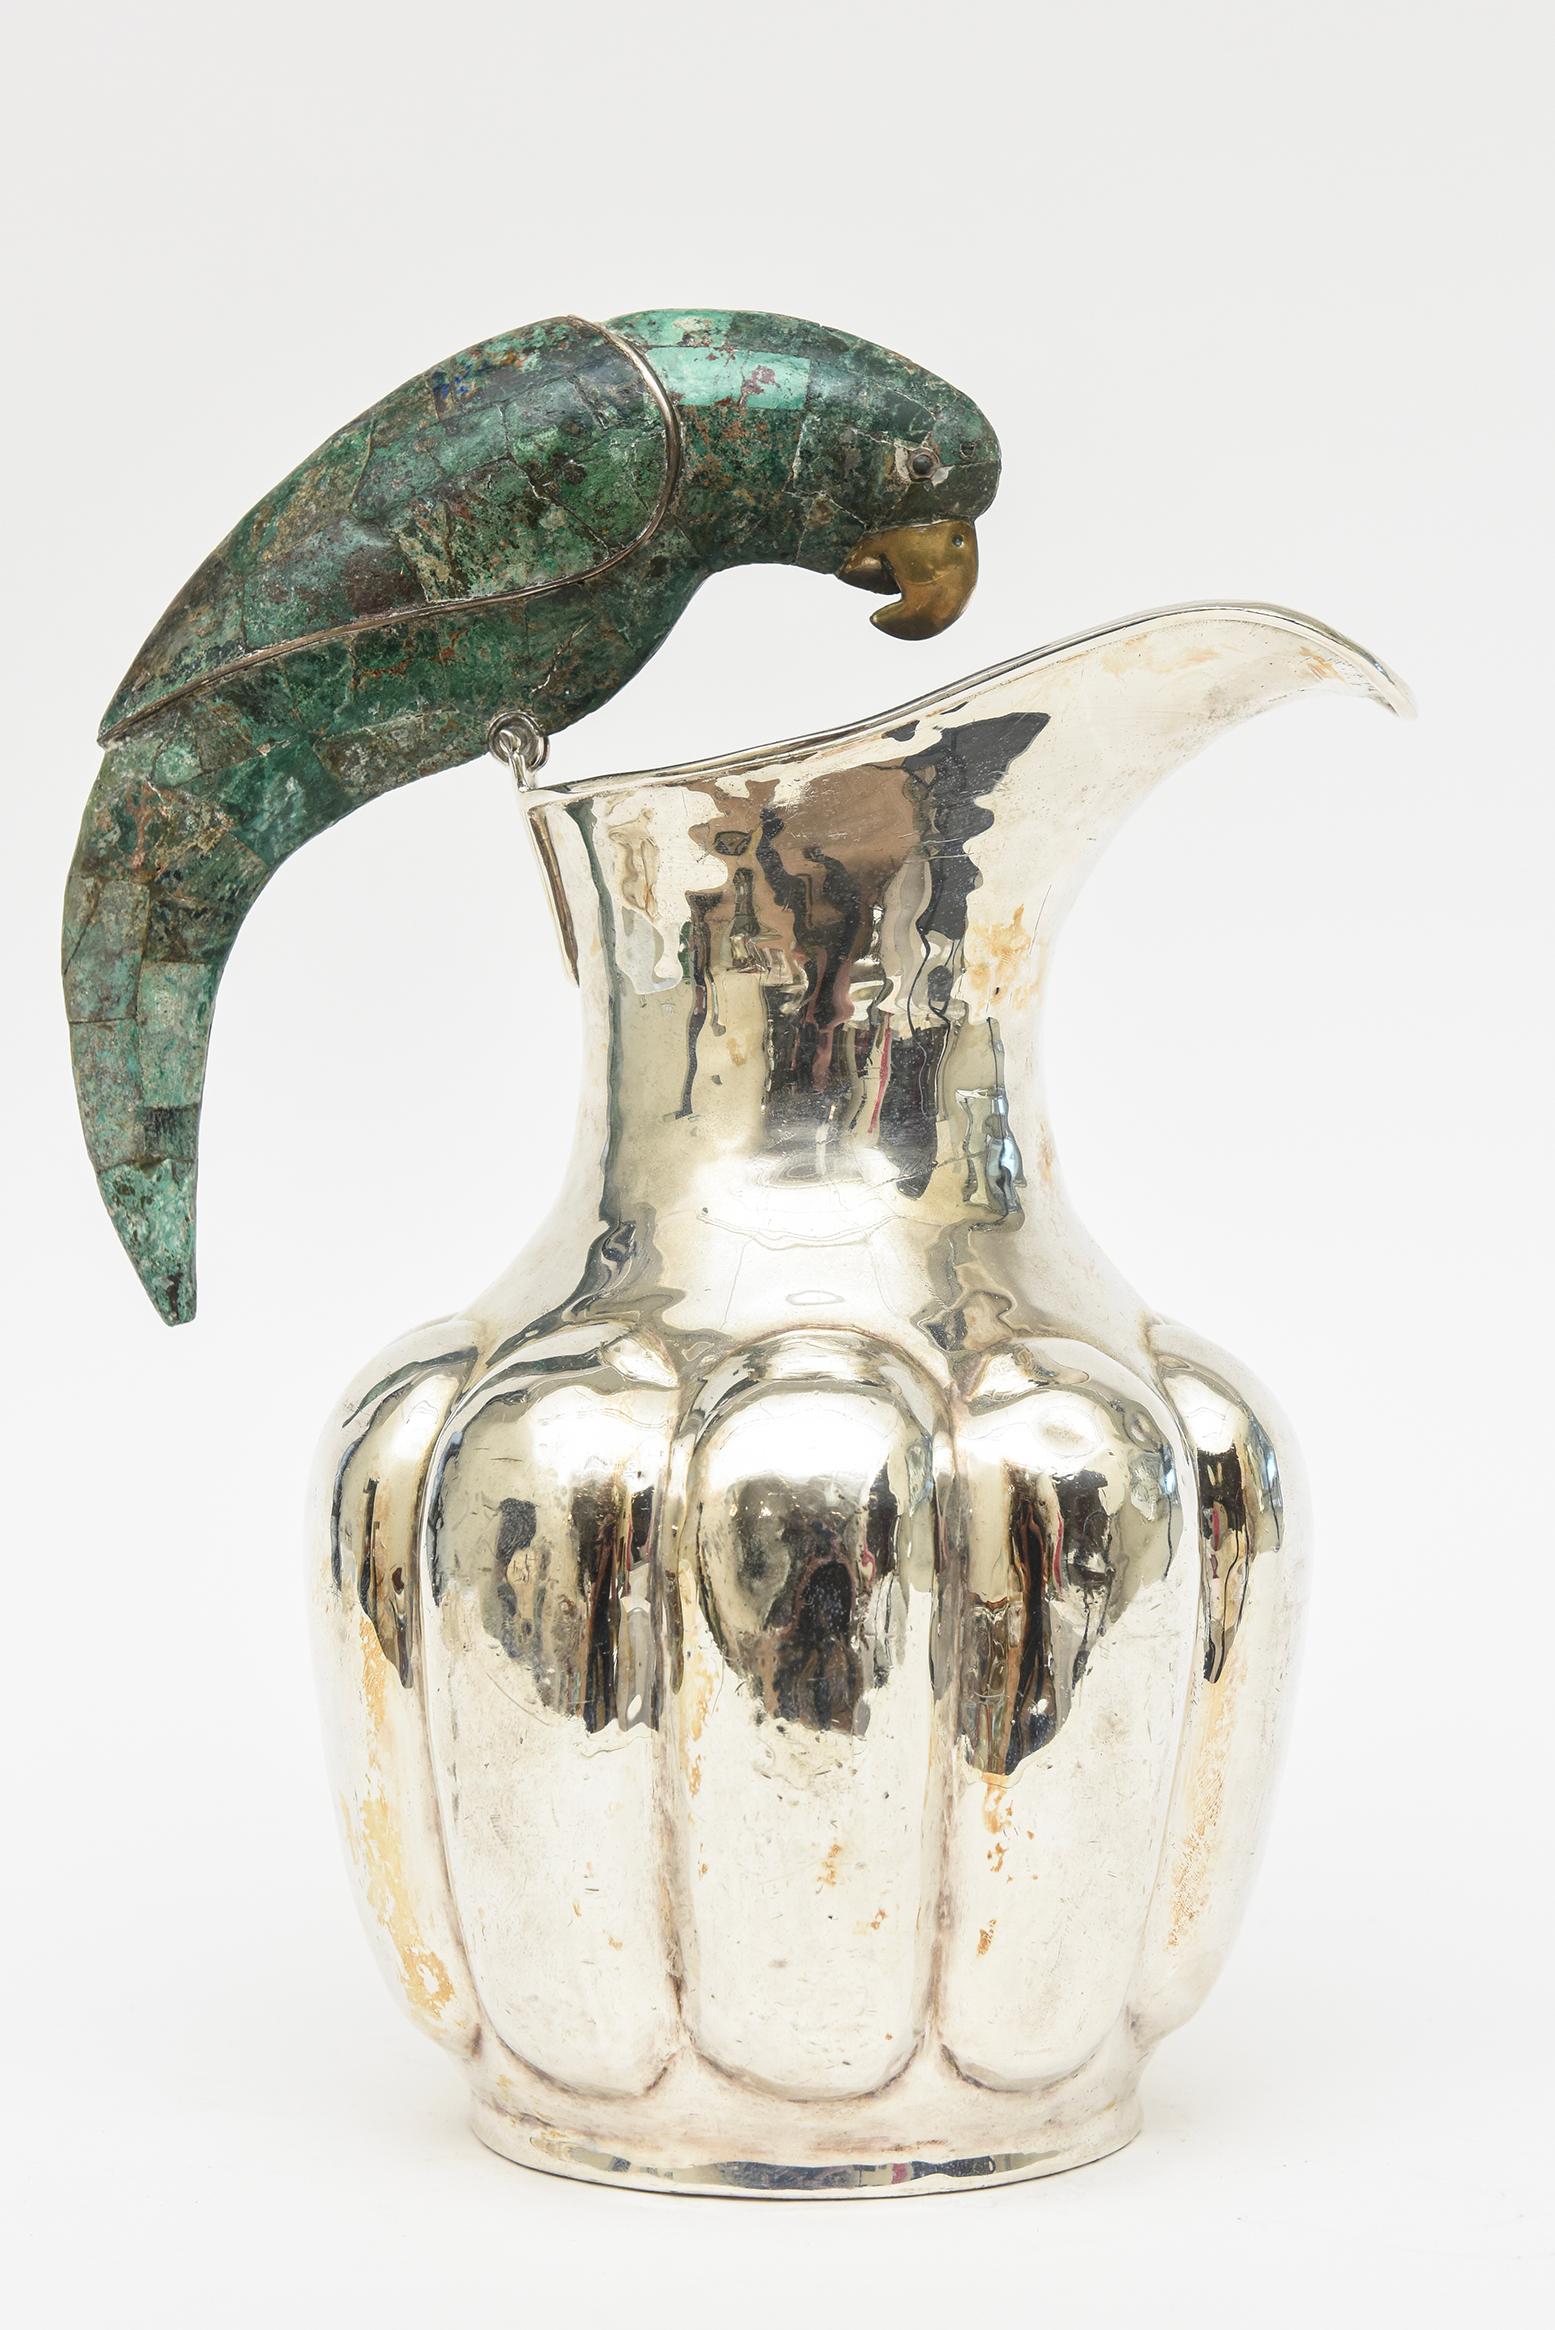 Vintage Los Castillo Silver-Plate Pitcher with Crushed Turquoise Stone Parrot  In Good Condition For Sale In North Miami, FL